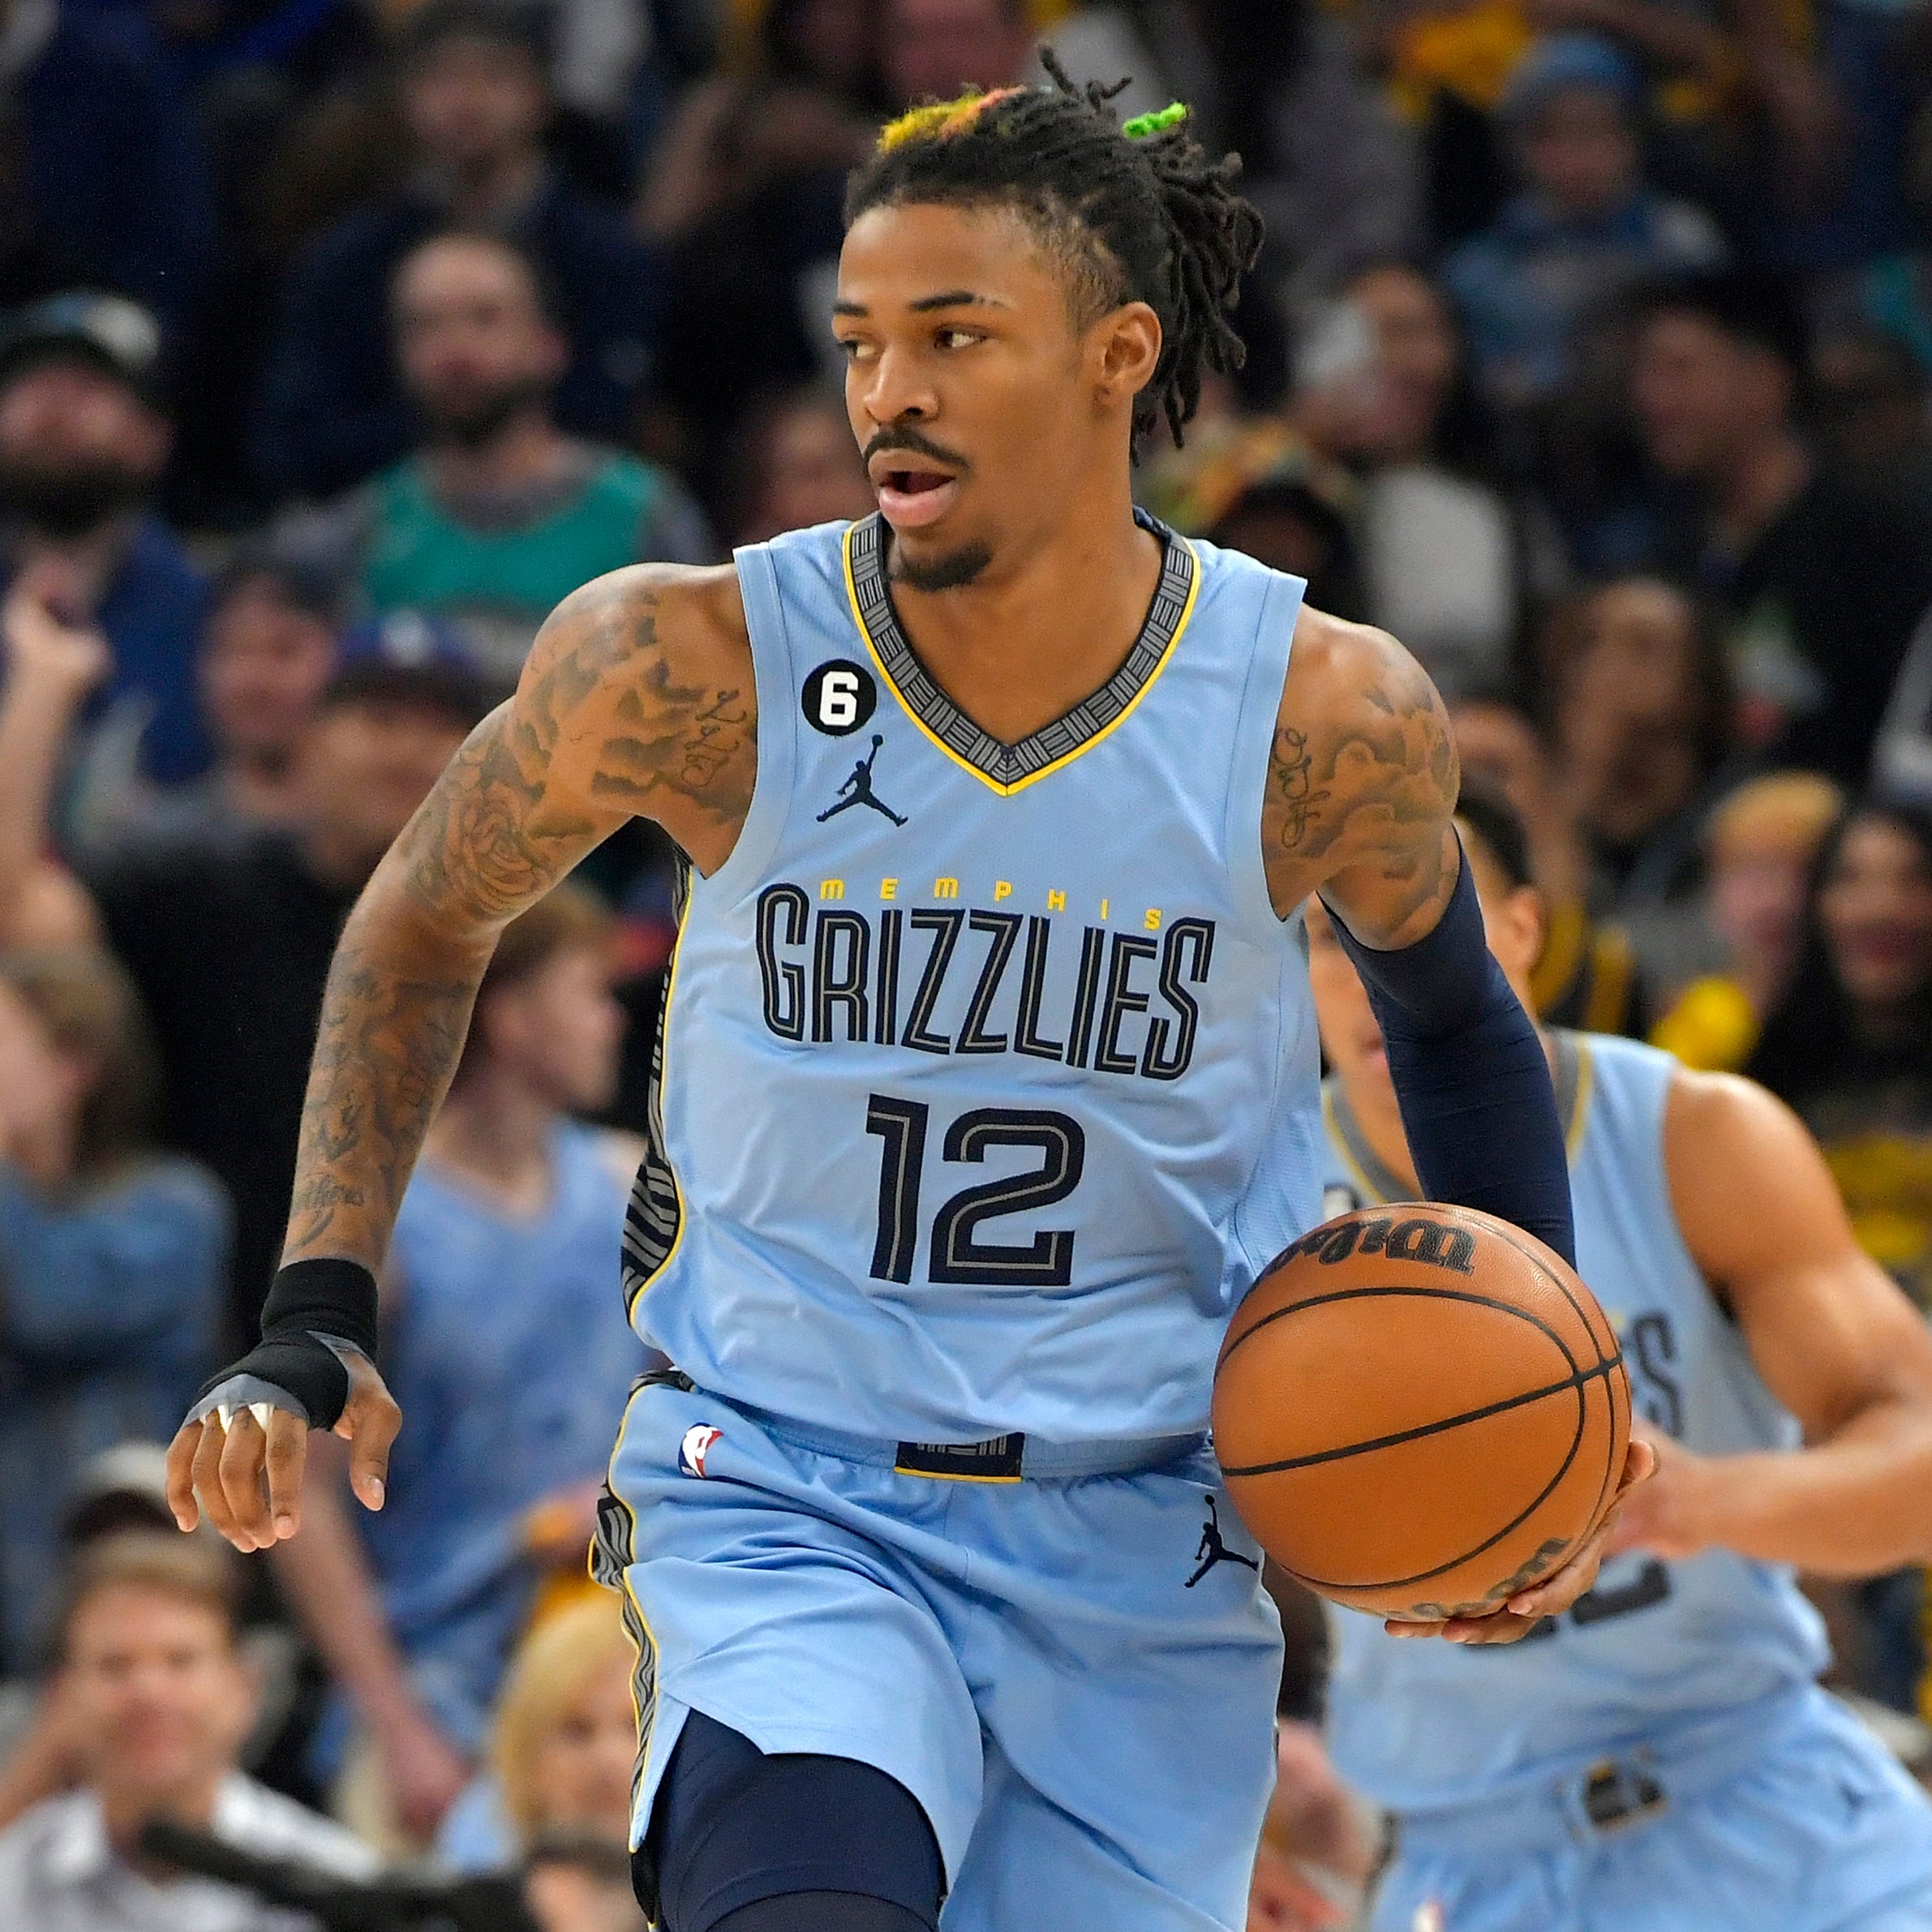 A series of cryptic social media posts from Memphis Grizzlies guard Ja Morant prompted a wellness check from local law enforcement, who said Morant is "fine" and taking a social media break . (AP Photo/Brandon Dill) ORG XMIT: NYOTK